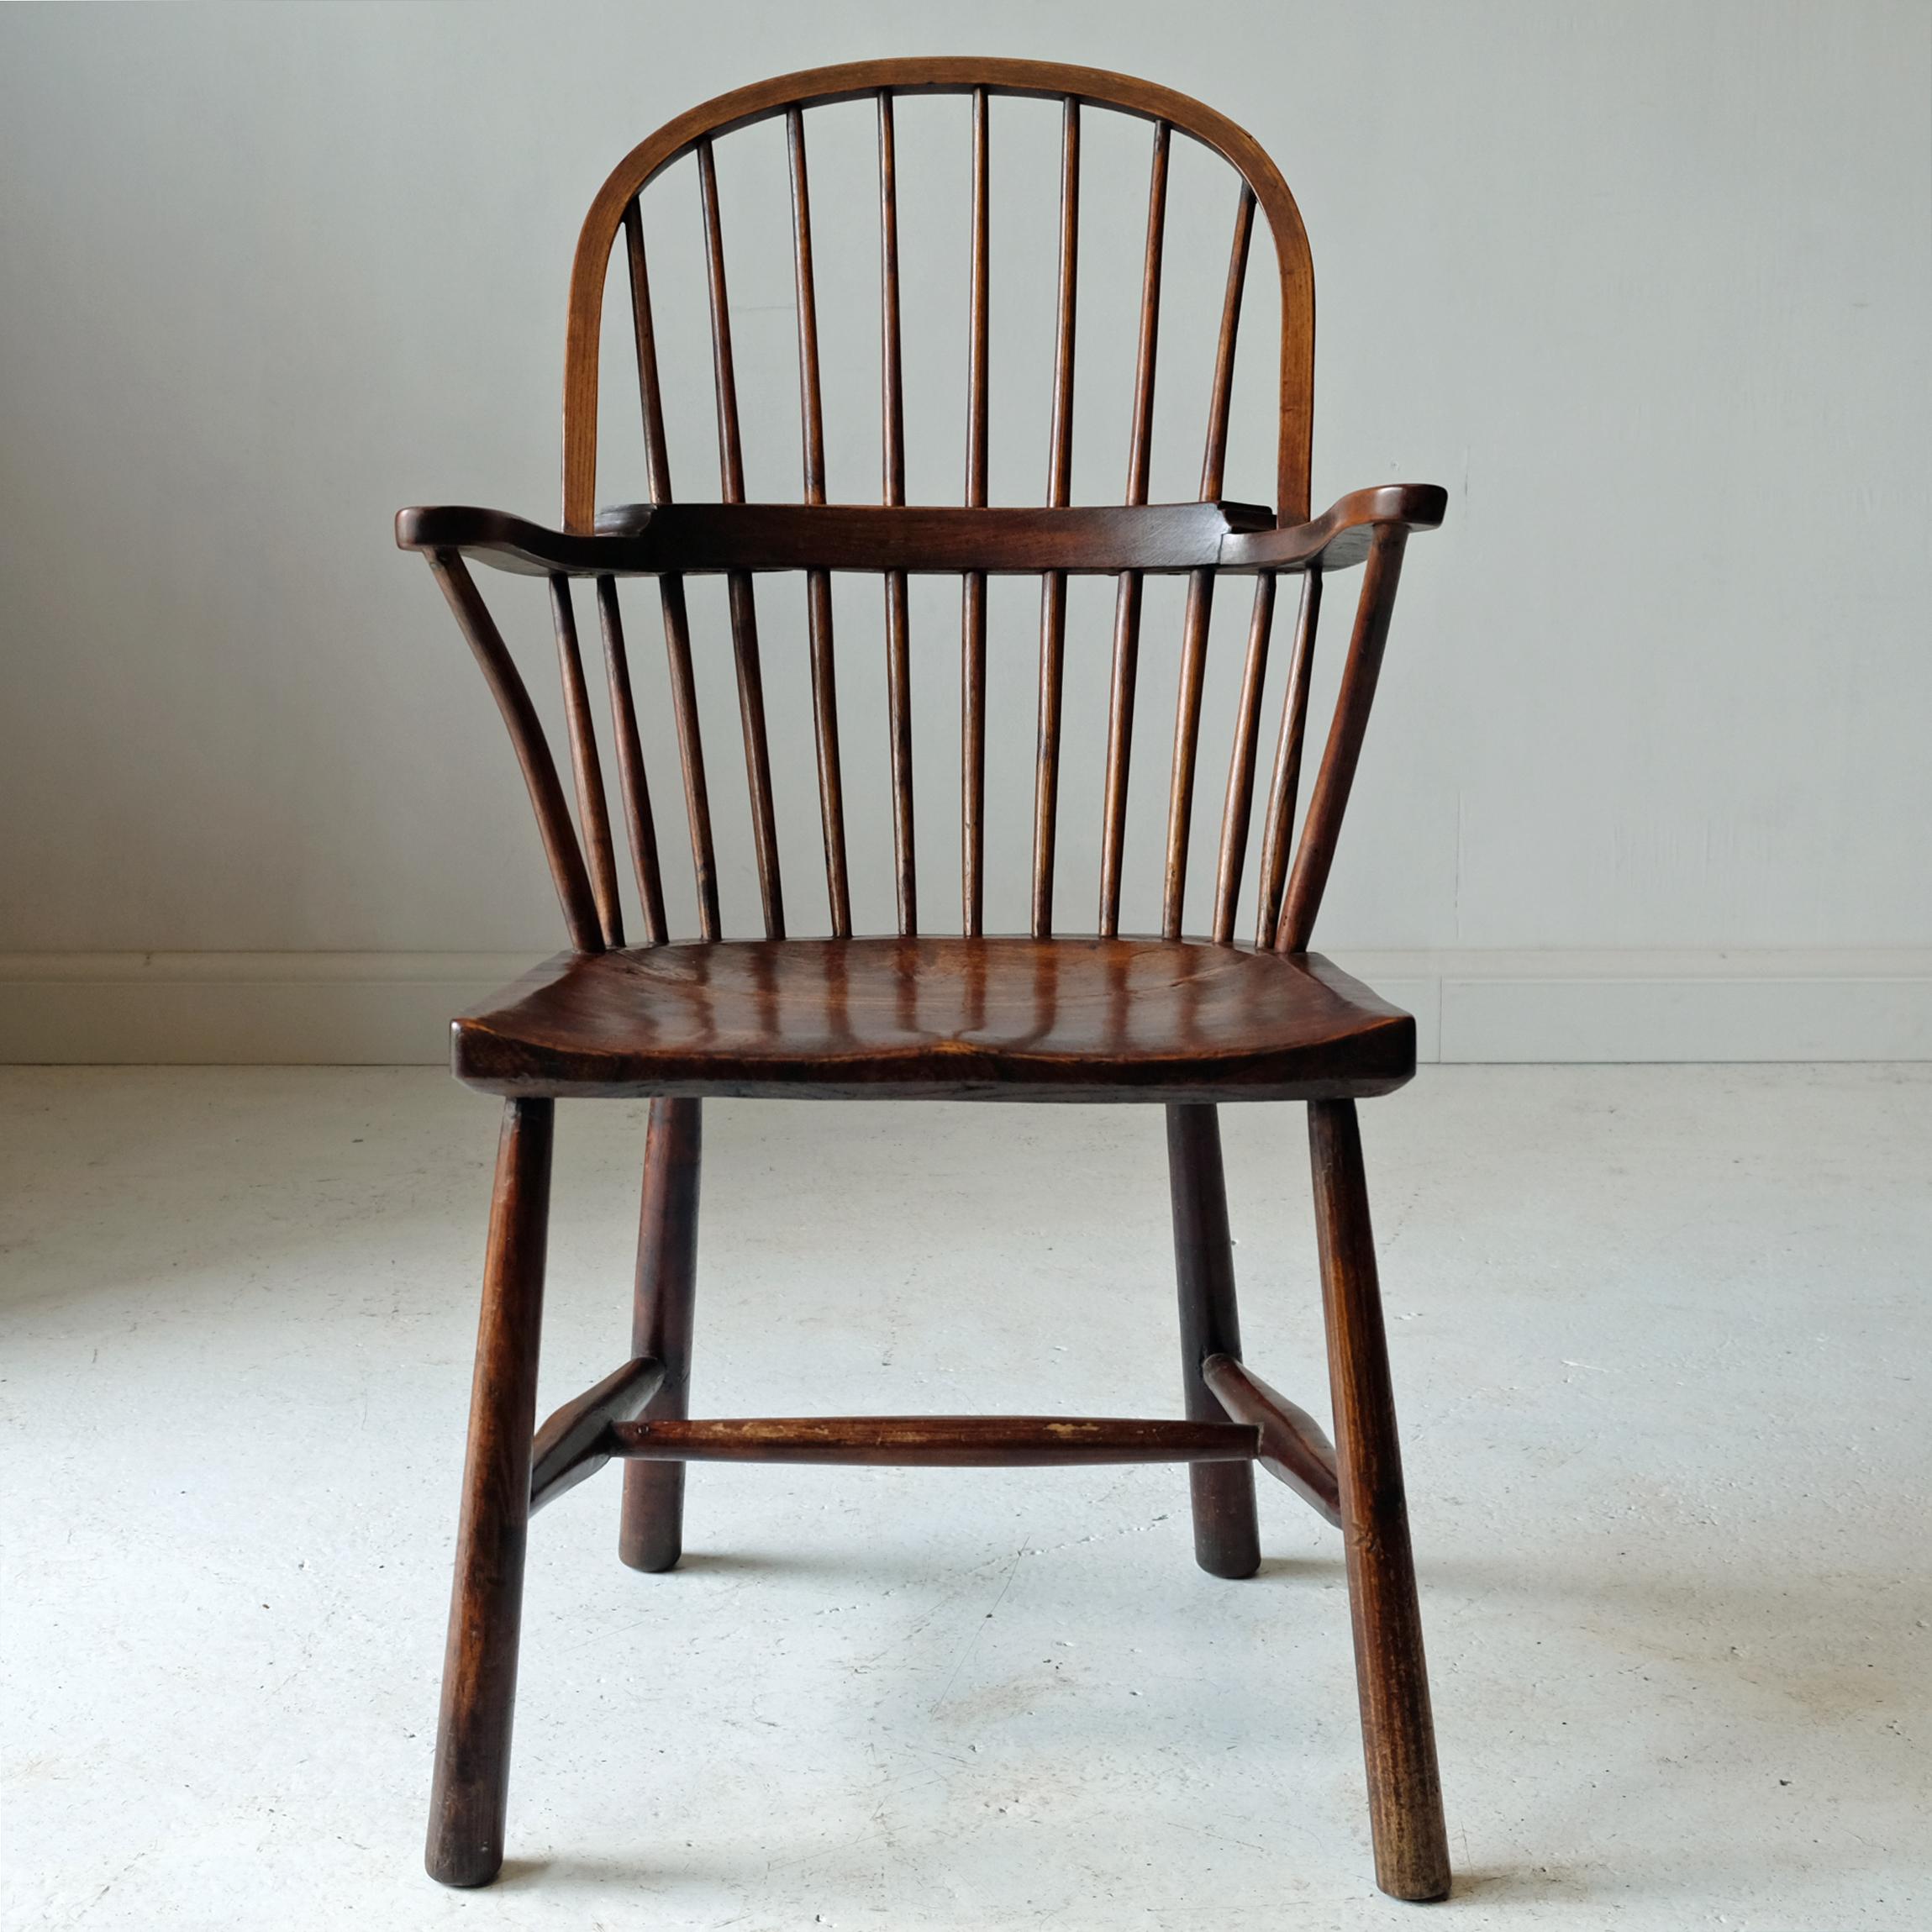 West Country Windsor armchair with simple stick back. Shaped elm seat with ash and beech arms and hand-drawn spindles. Plain tapered legs with H stretcher. Minor evidence of historic woodworm, mainly to legs. Likely Cornish, circa